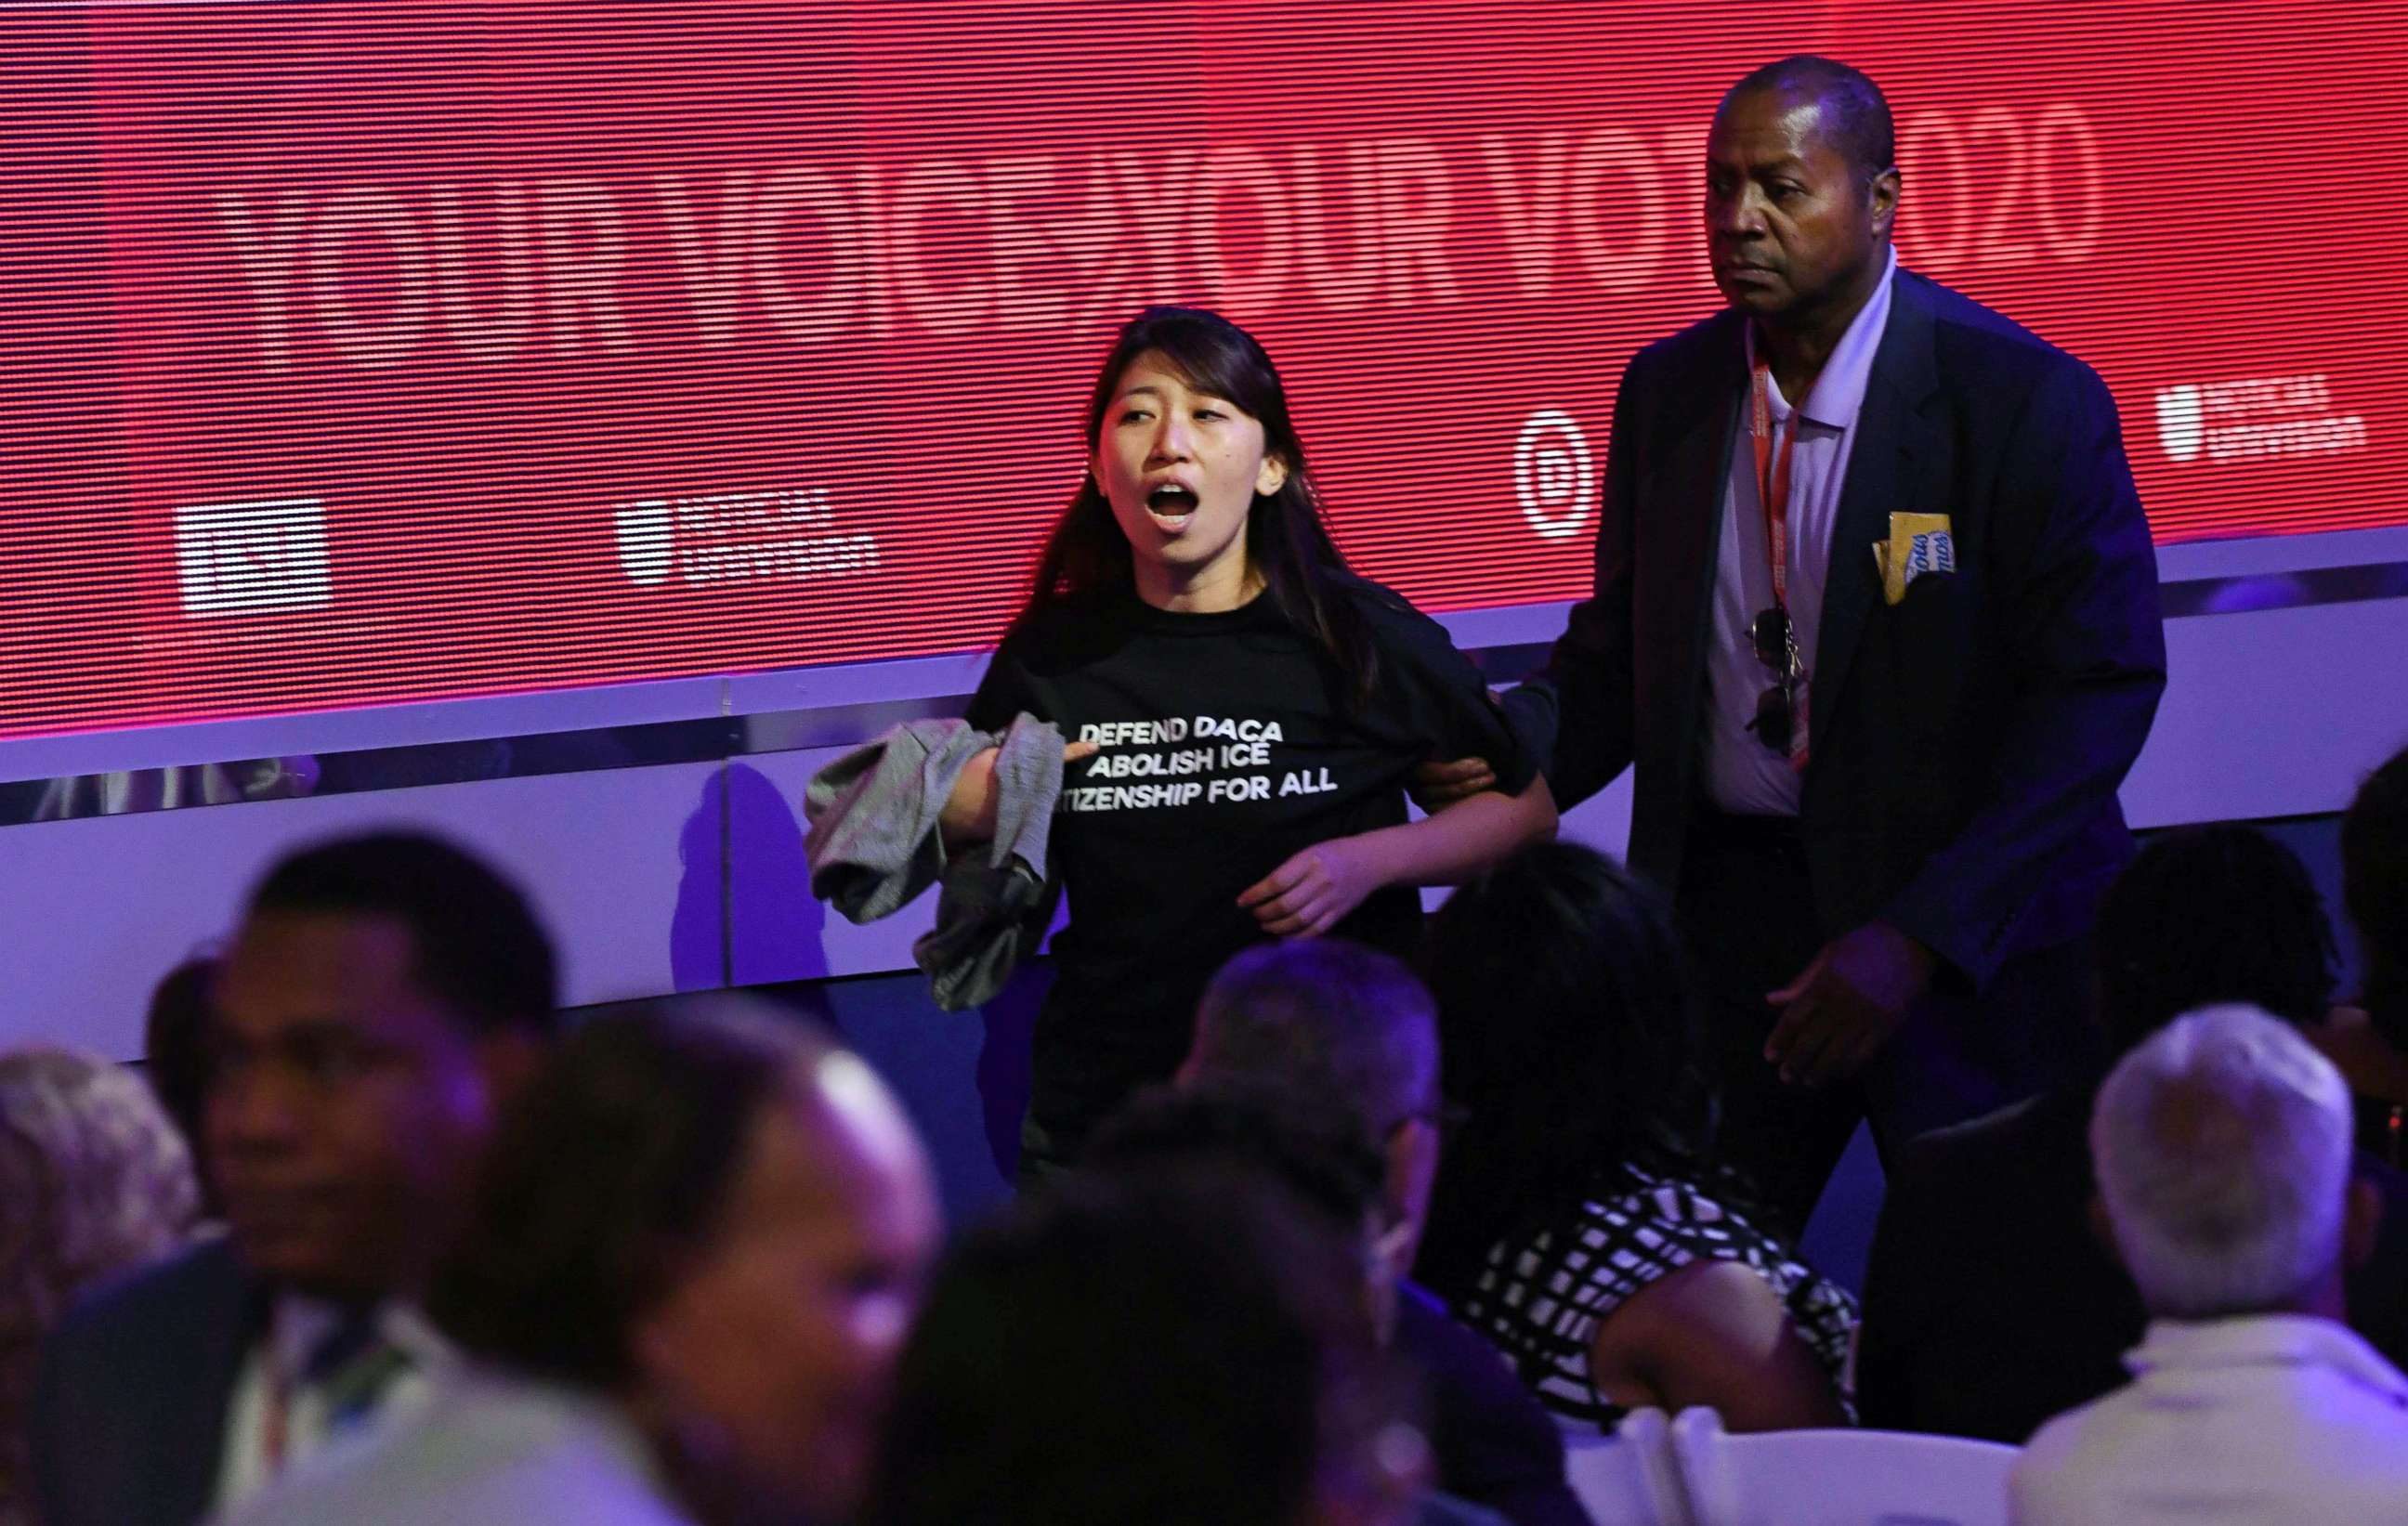 PHOTO: A protester is escorted during the third Democratic primary debate of the 2020 presidential campaign season in Houston, Sept. 12, 2019.